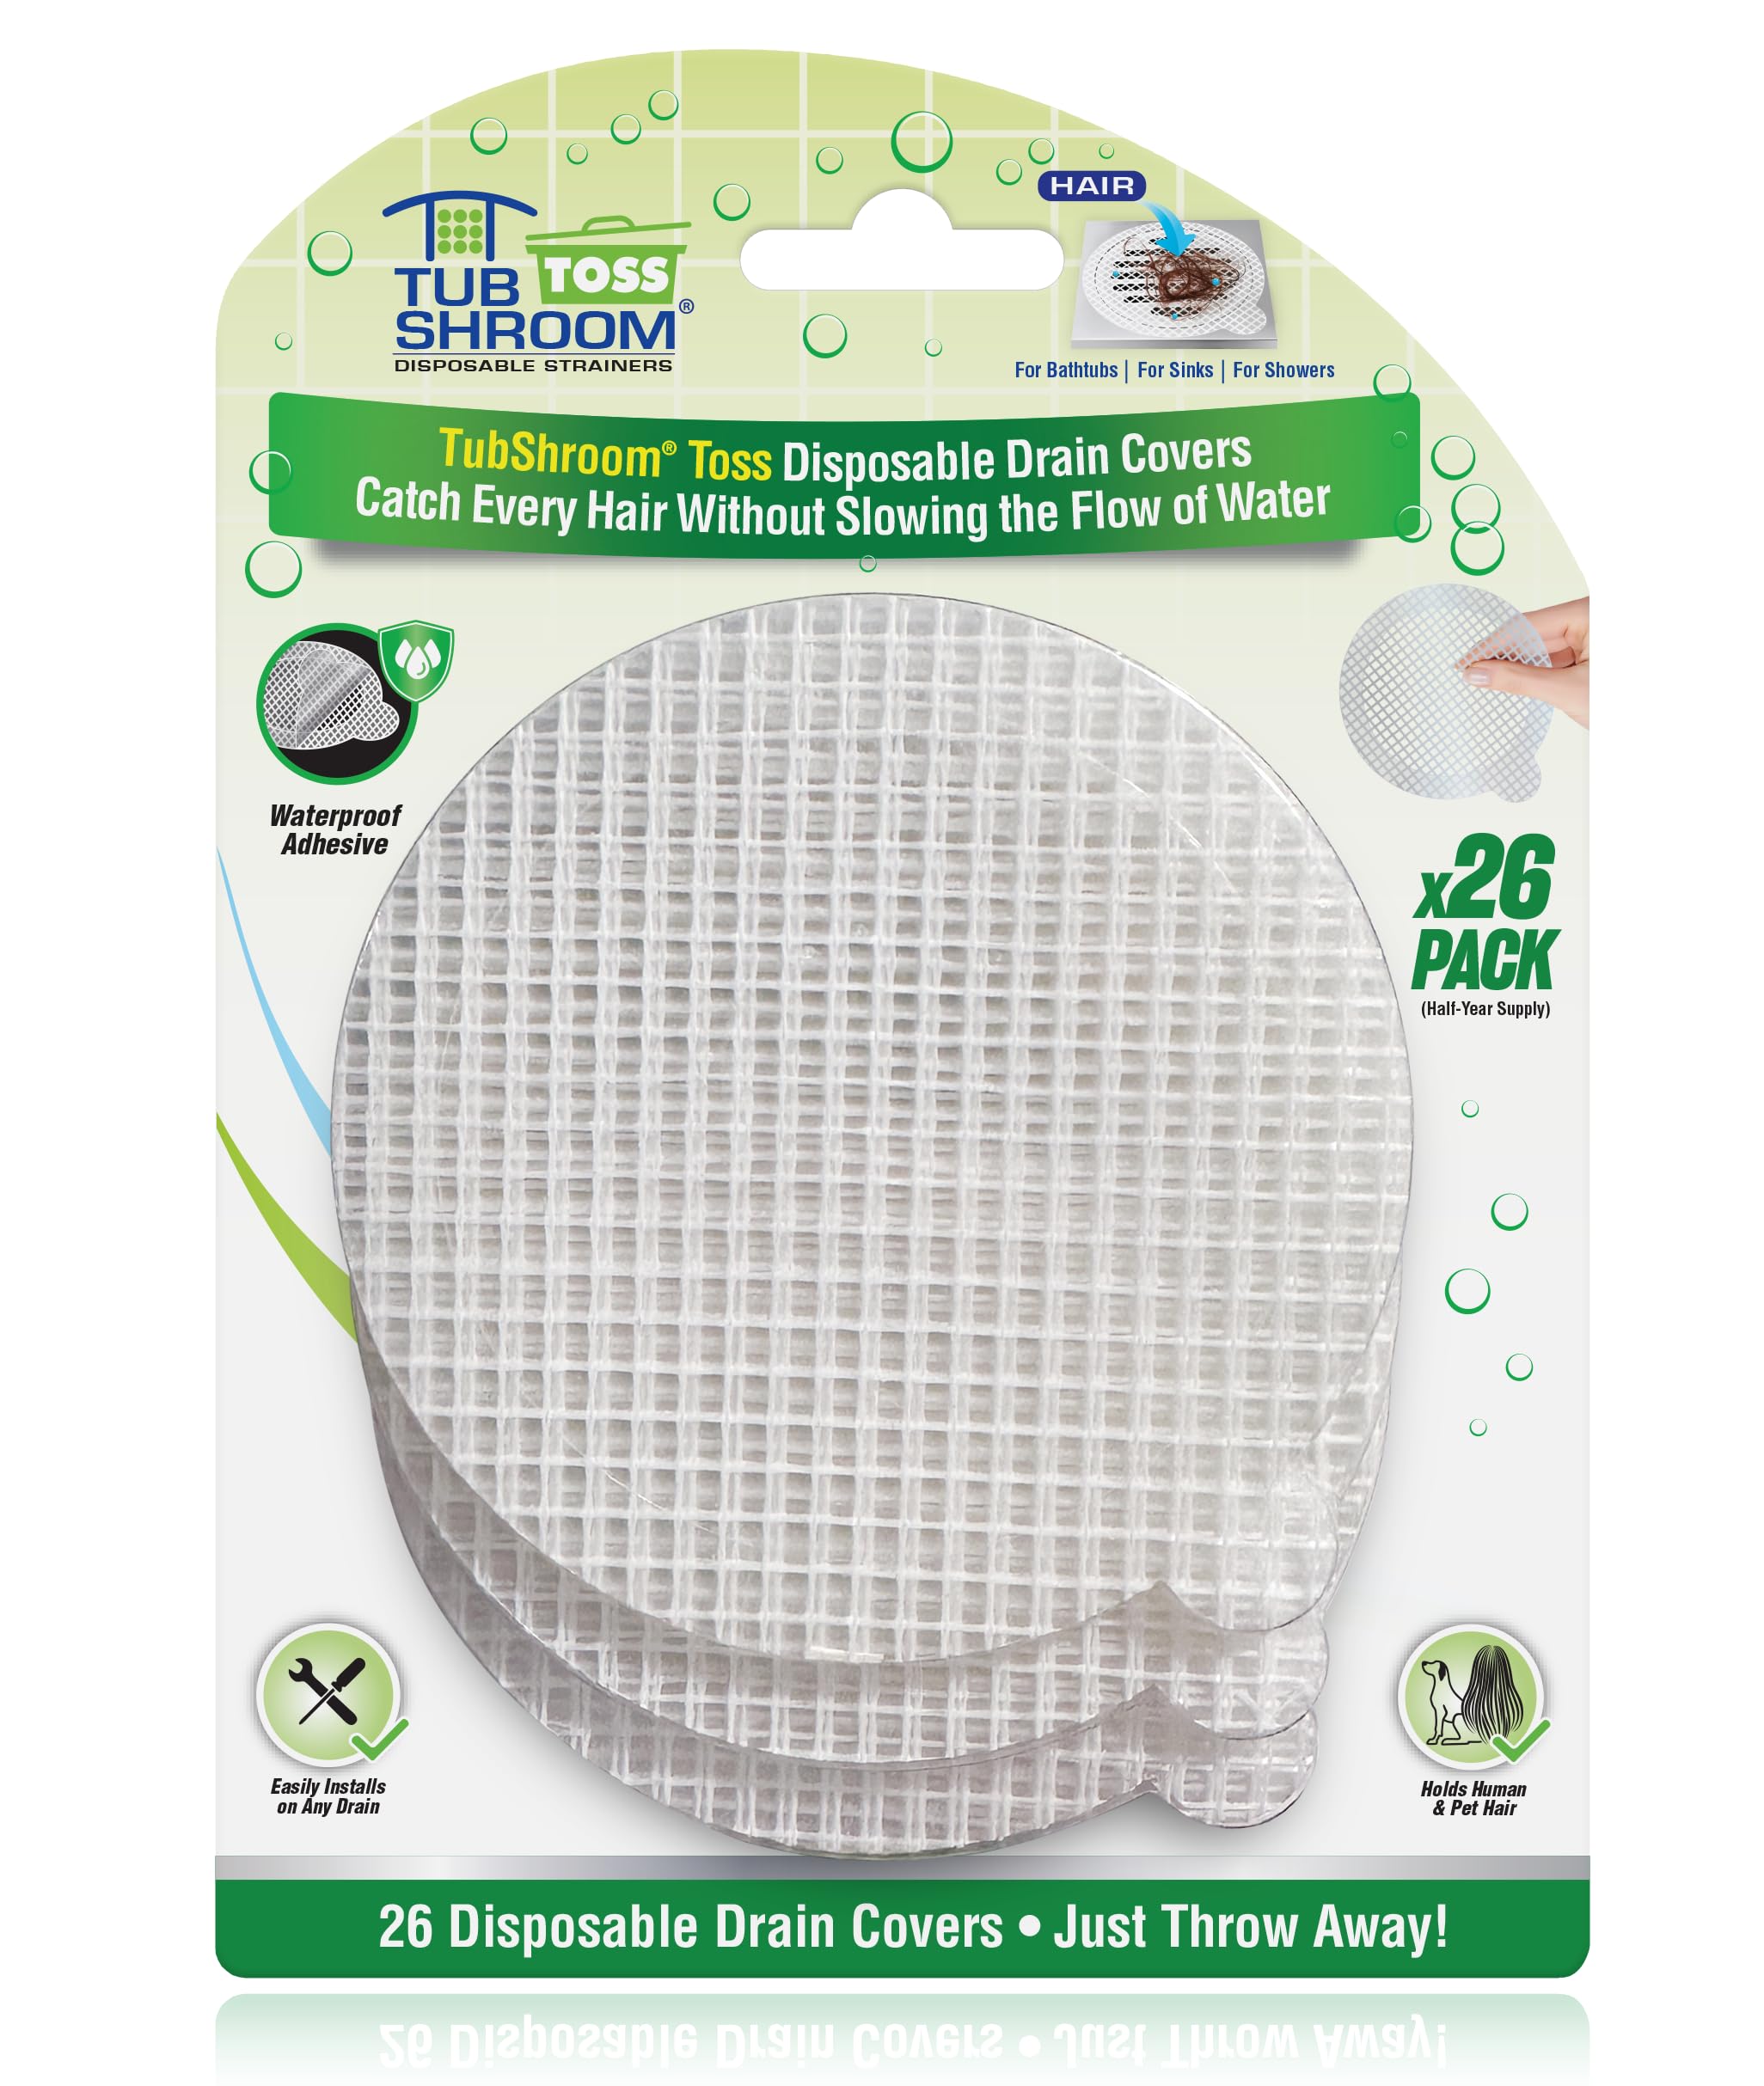 TubShroom Toss 26pk Disposable Drain Covers - Hair Catcher Mesh Sticker Strainers for Shower Bathtub and Bathroom Sink Drains to Prevent Clogged Drains, Half Year Supply